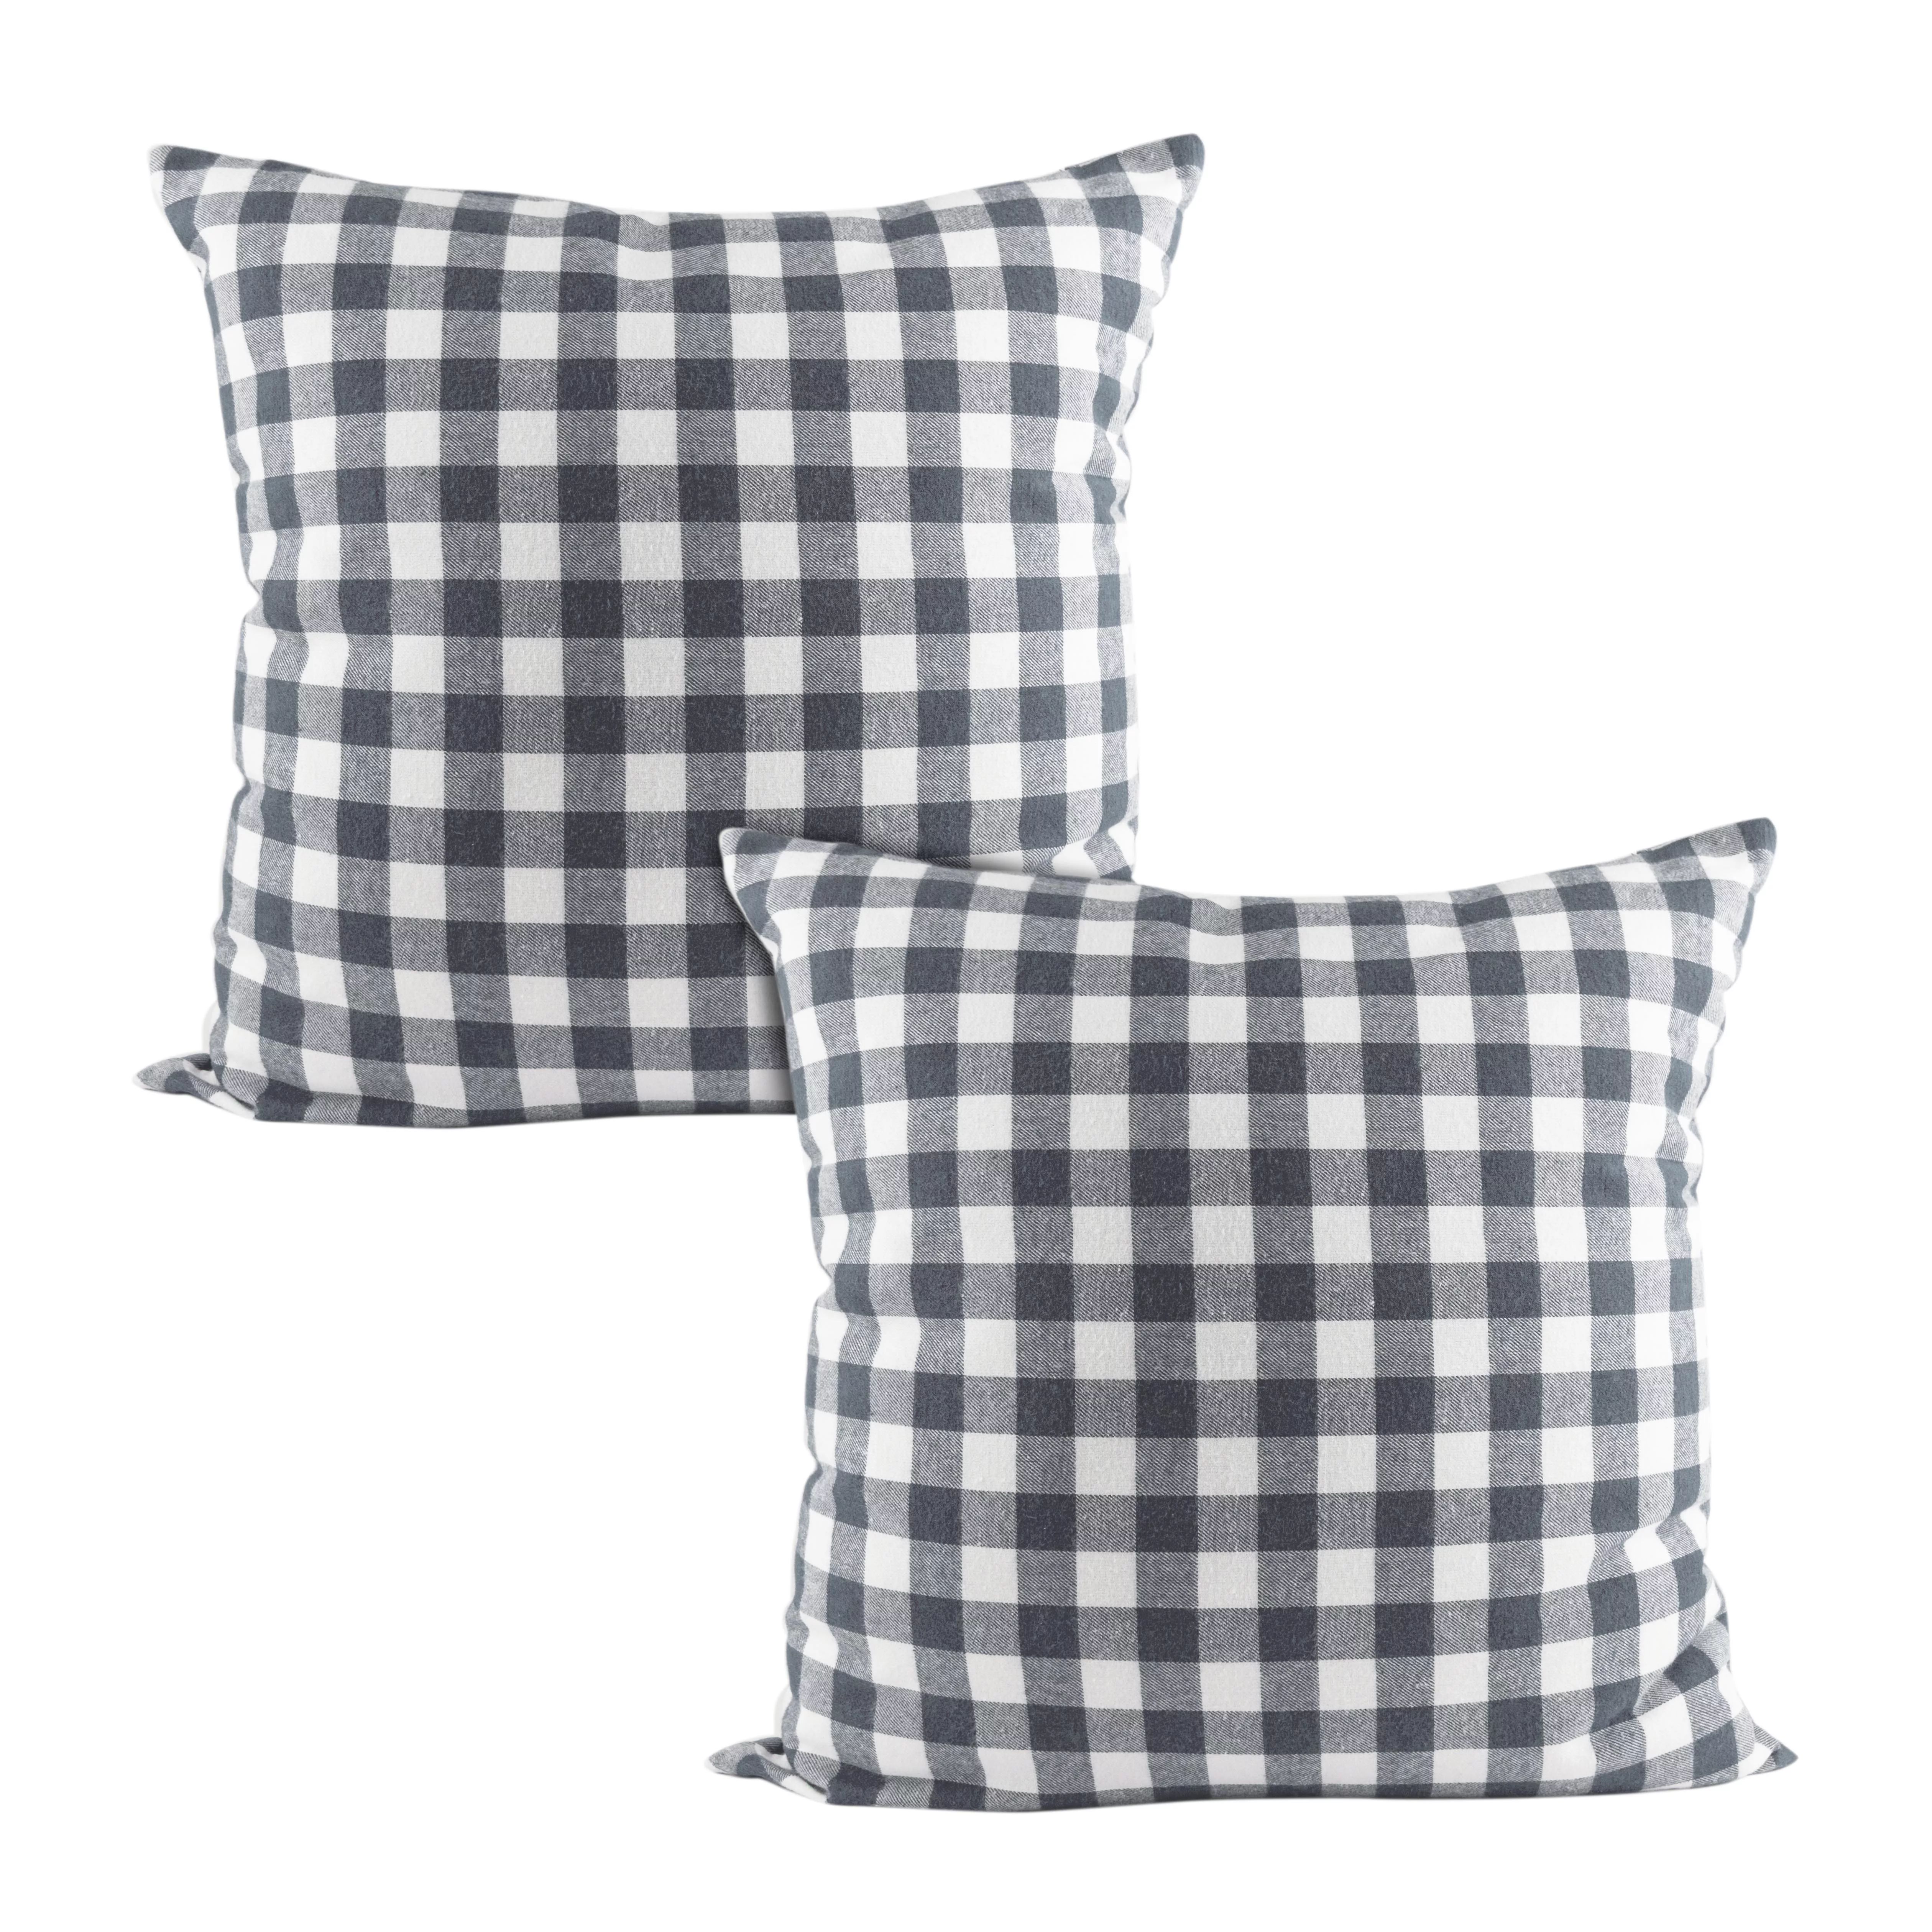 Mainstays Gingham Plaid Decorative Pillow Cover, 2 pack | Walmart (US)